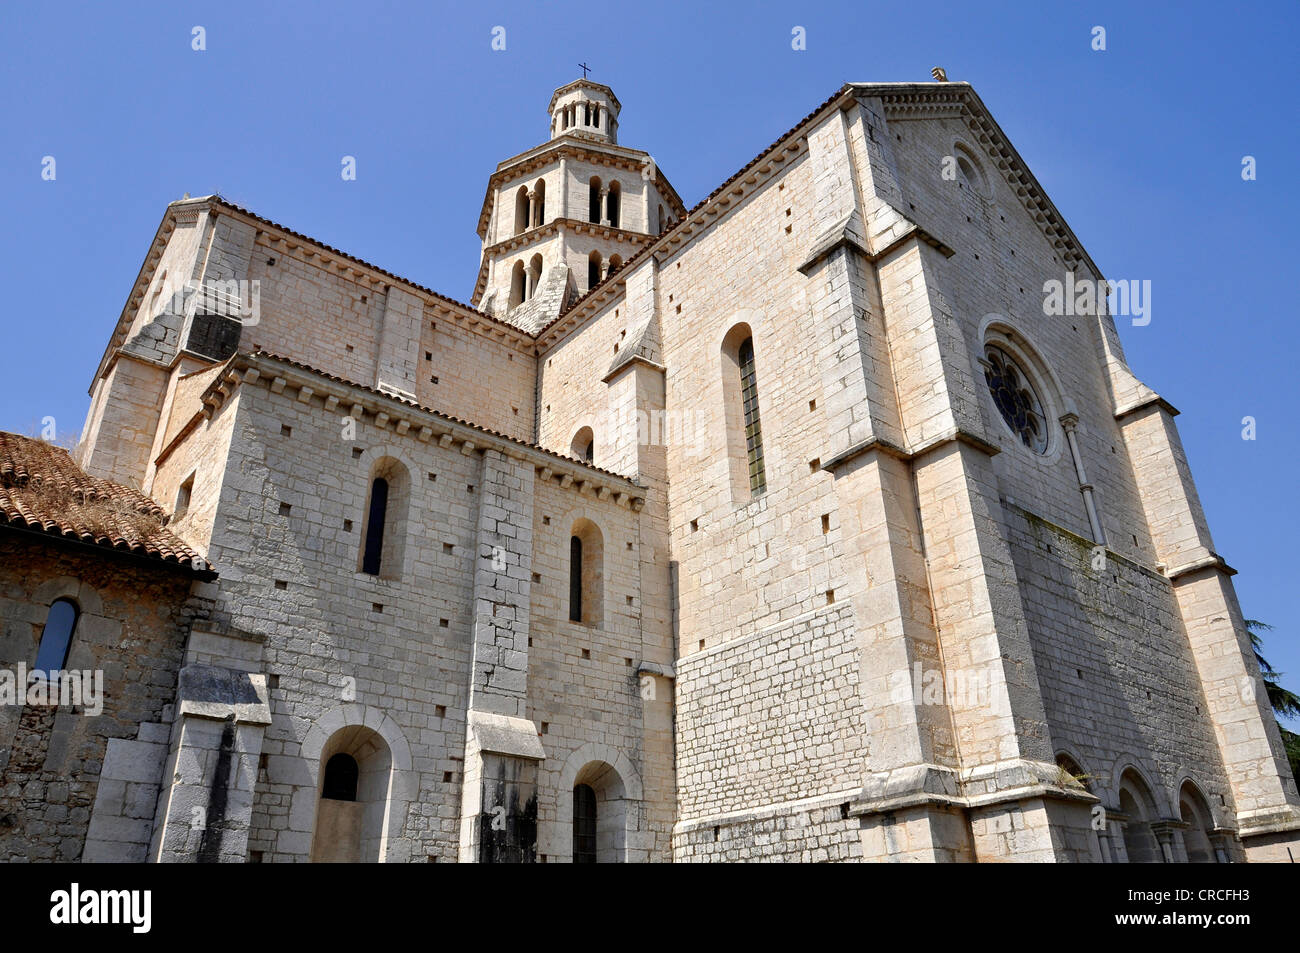 Transept, bell tower and apse of the Gothic basilica of the Cistercian monastery Fossanova Abbey near Priverno, Lazio, Italy Stock Photo